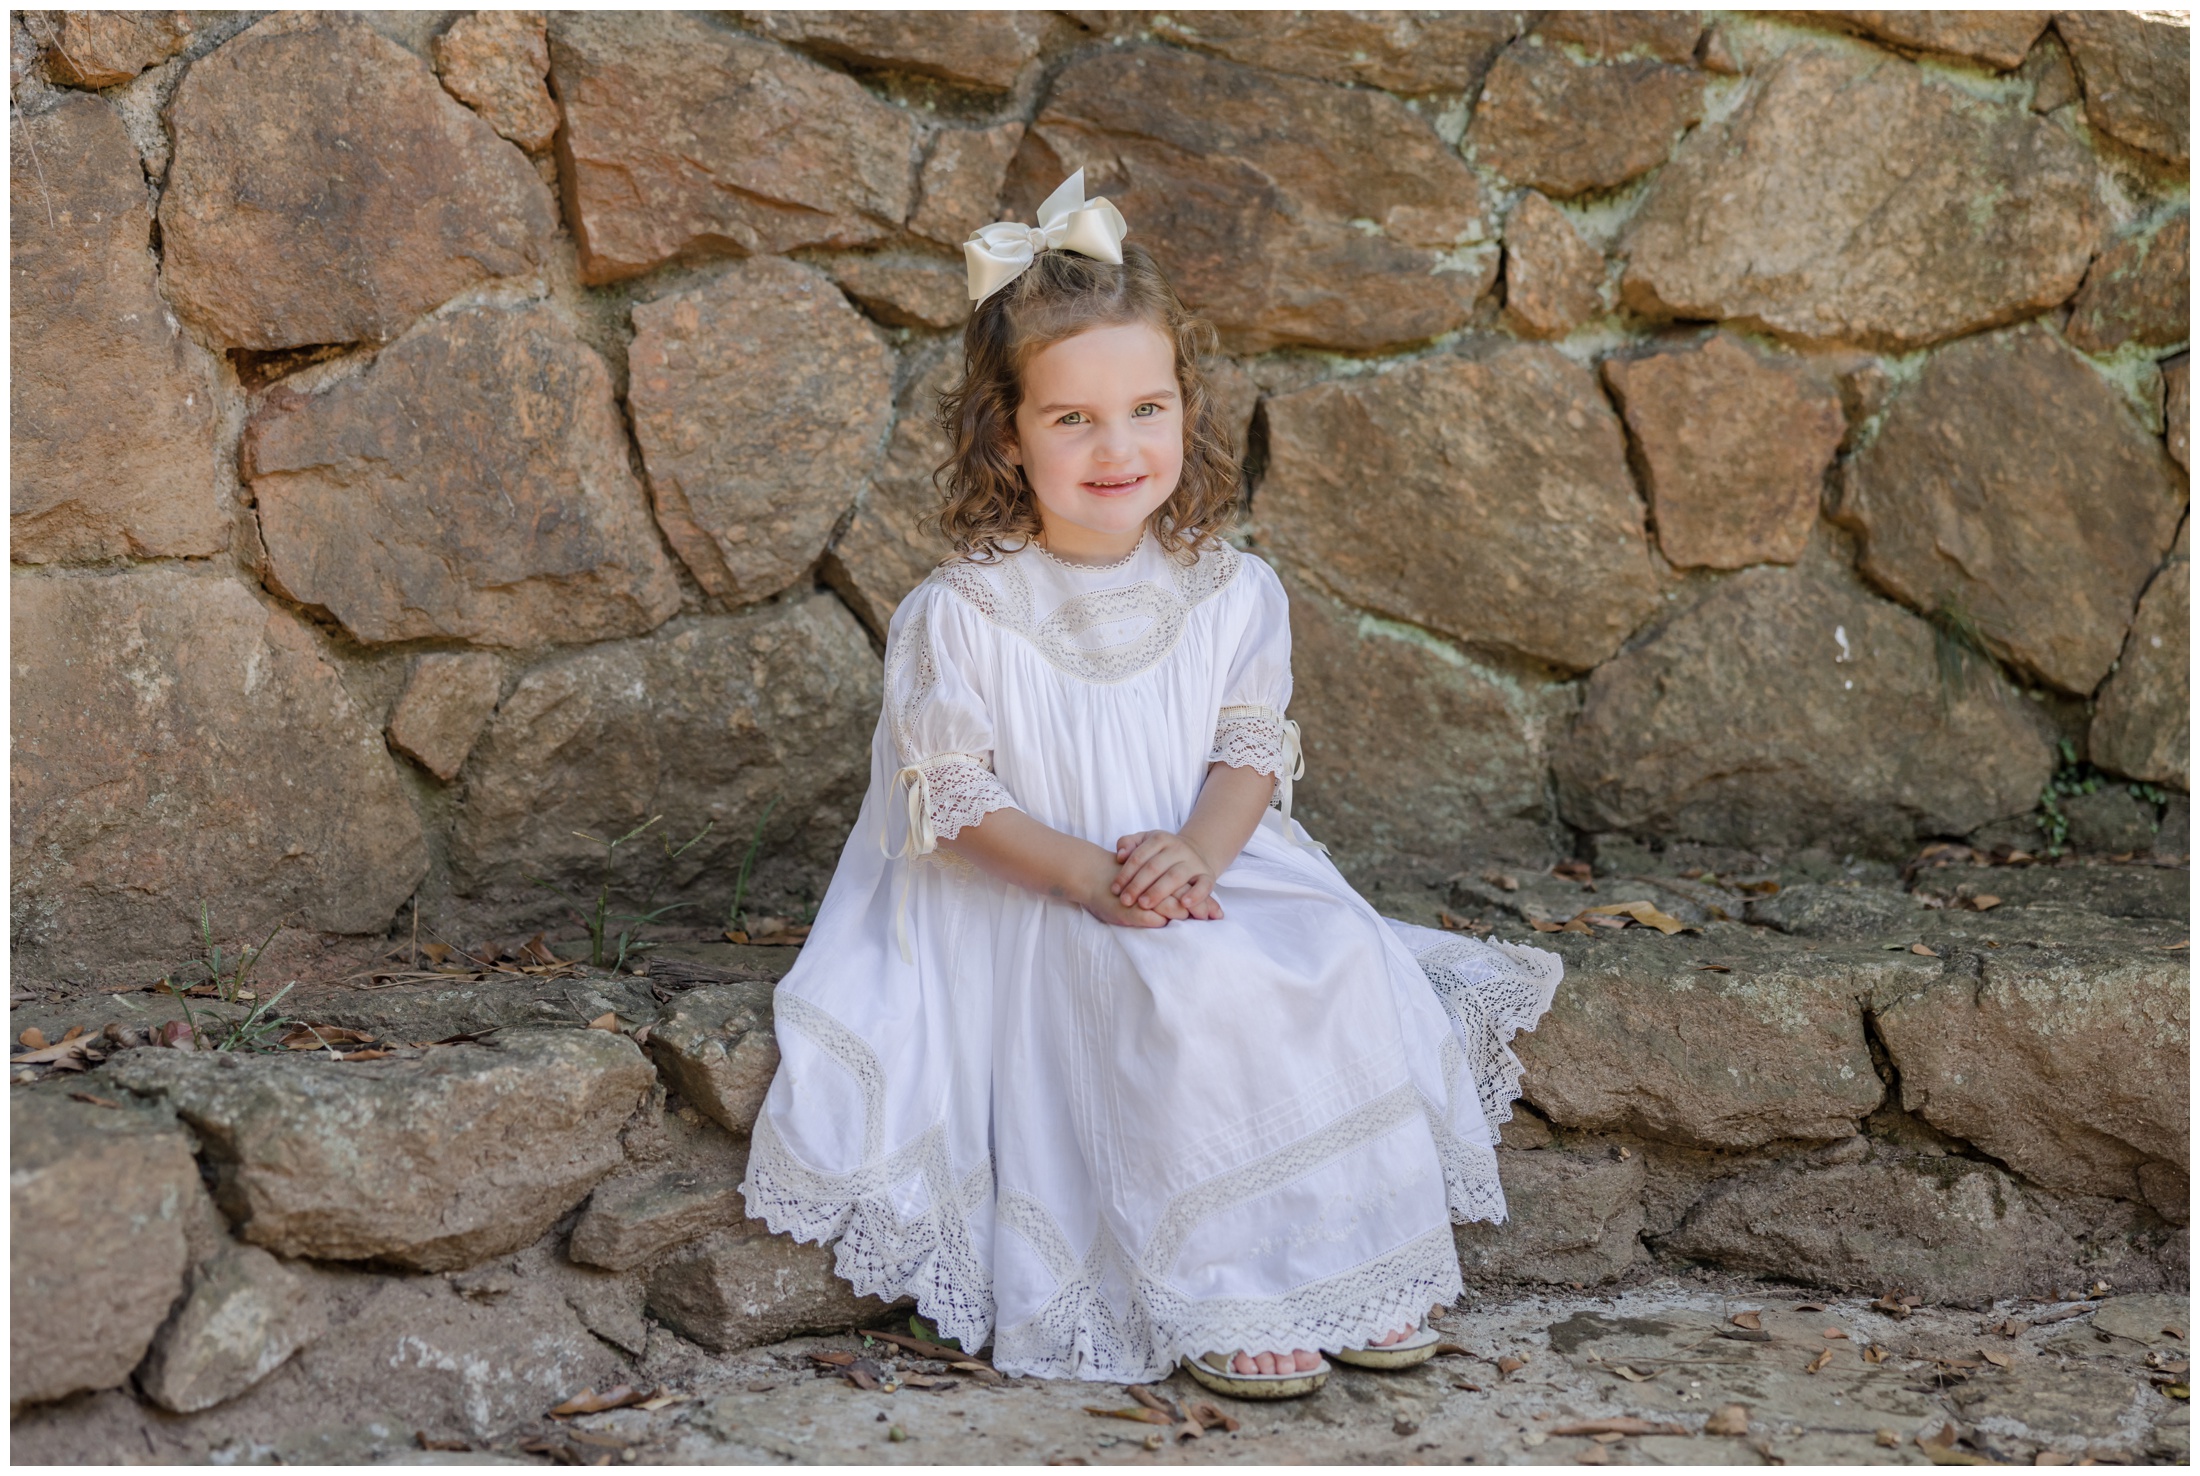 Greenville children's portraits of a young girl wearing a white heirloom lace dress sitting on a rock wall bench.